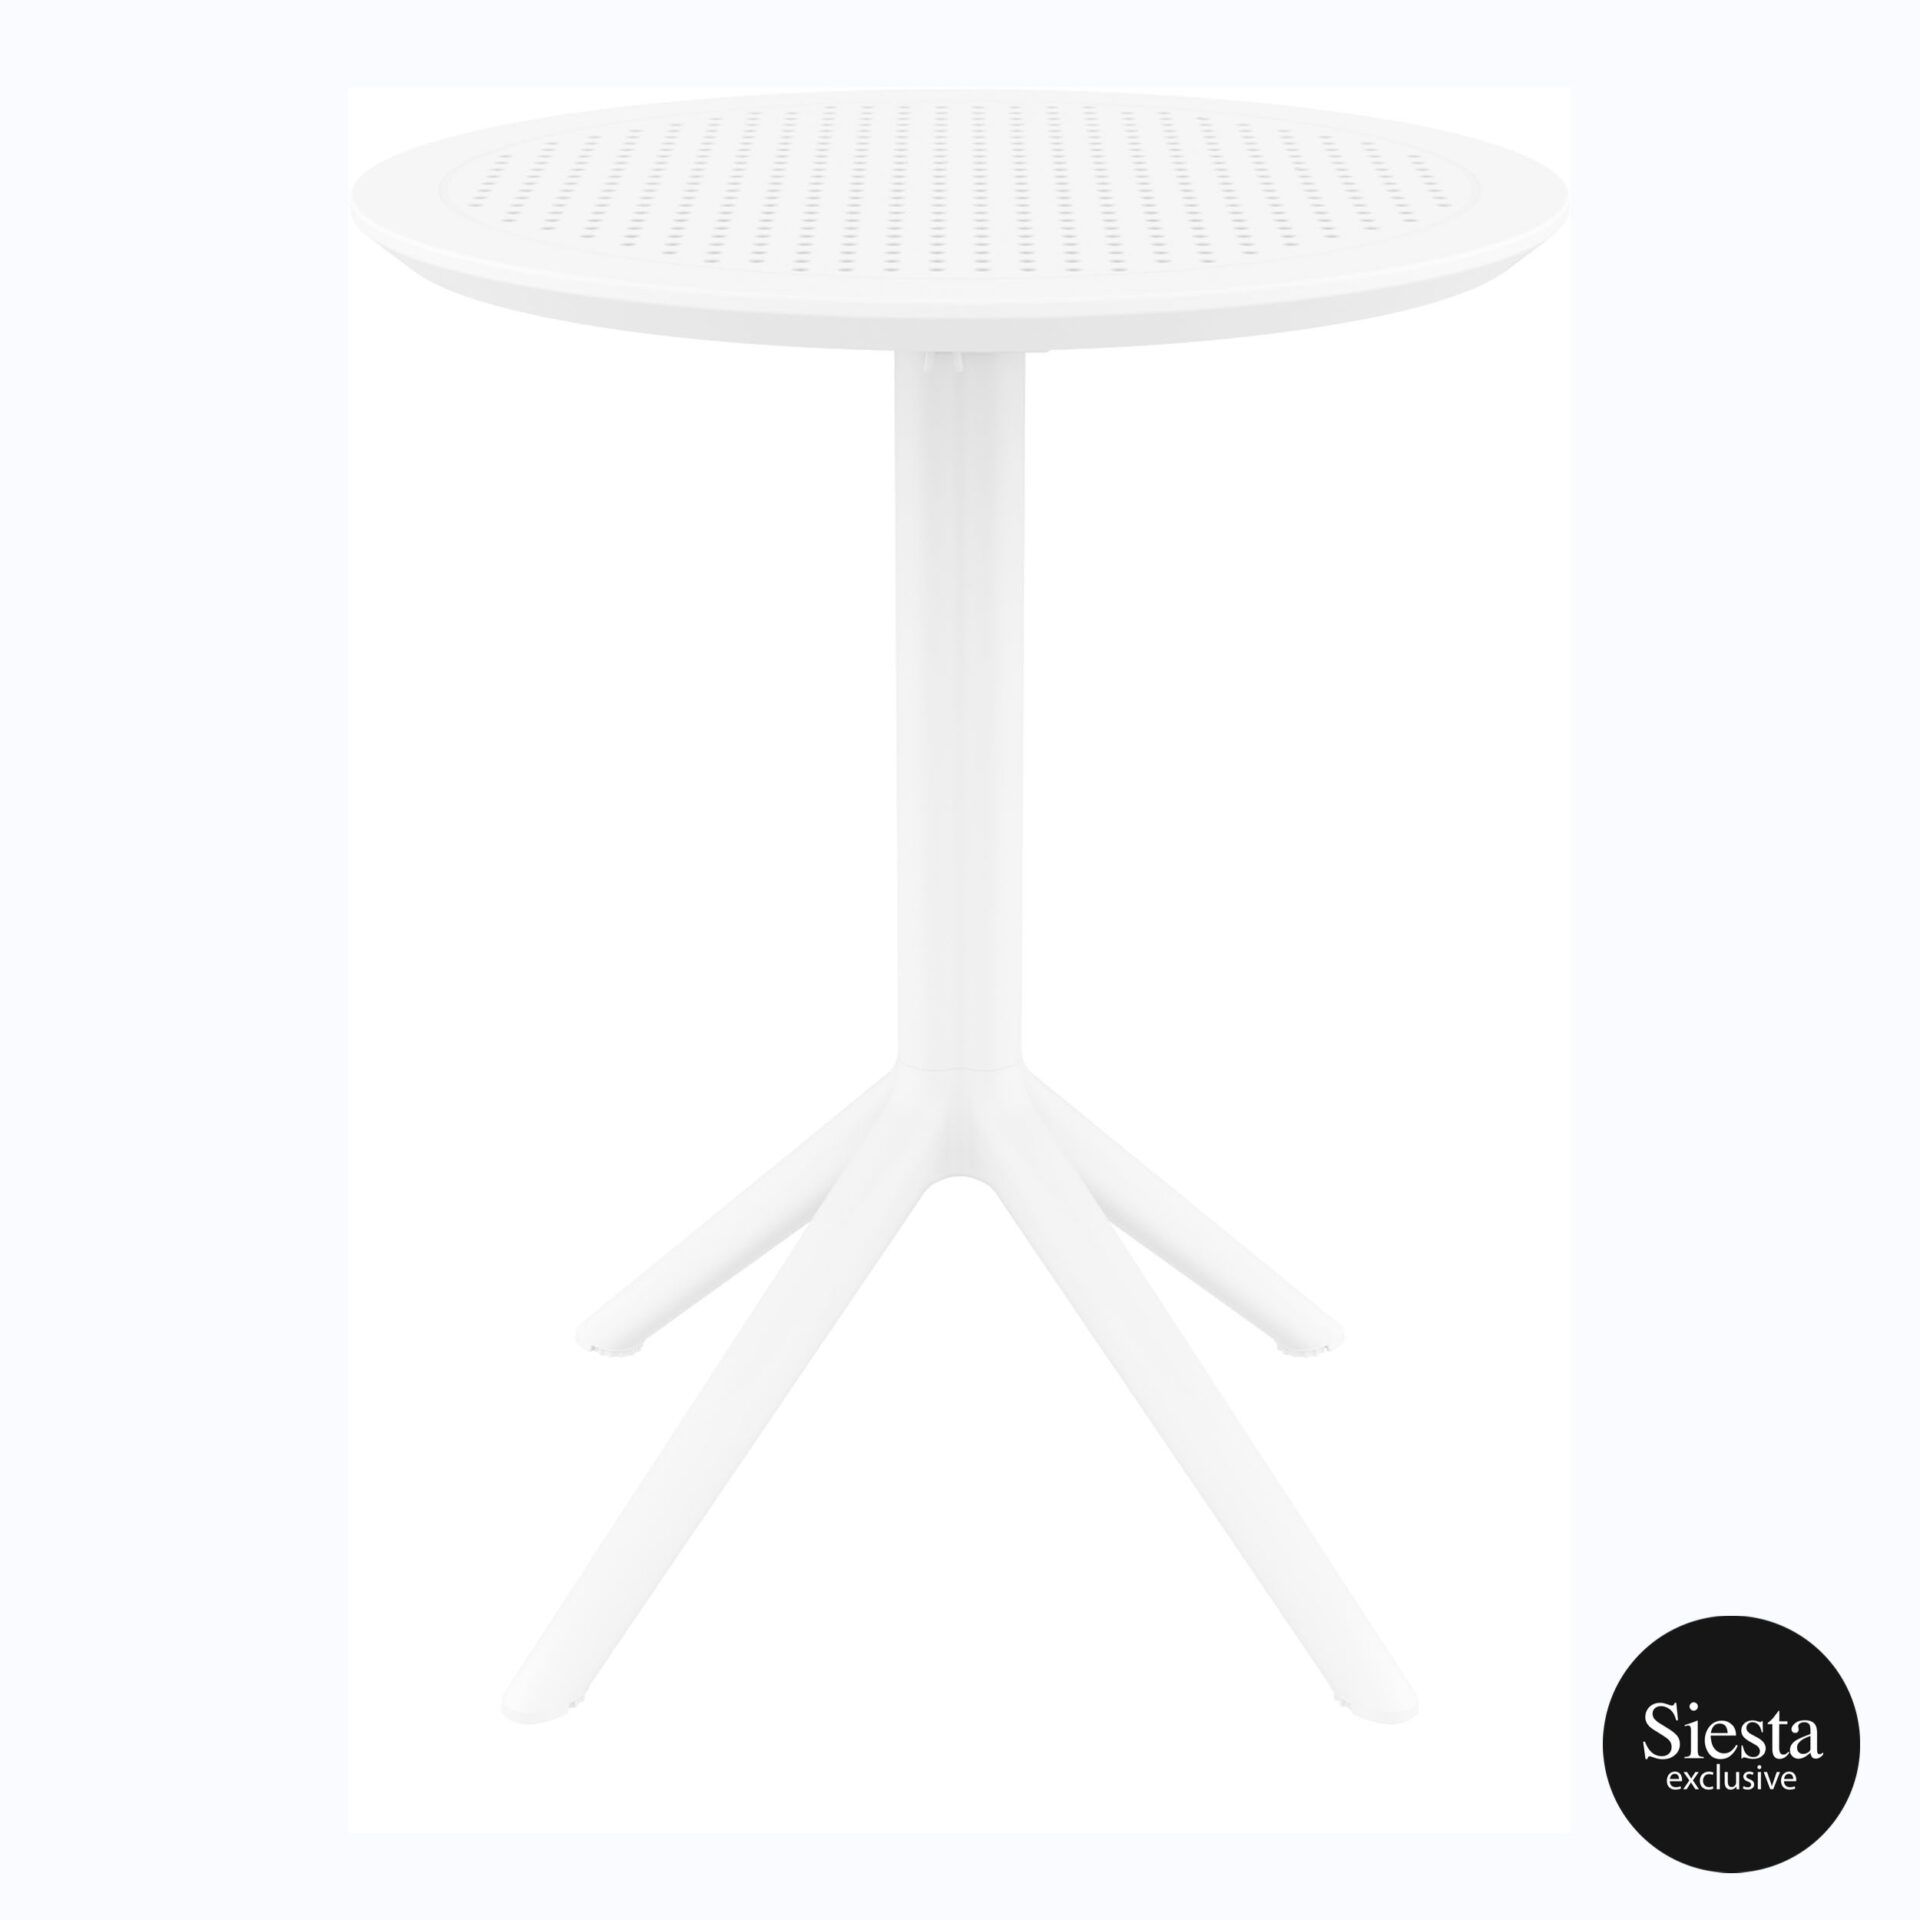 025 sky folding table 60 Y white front